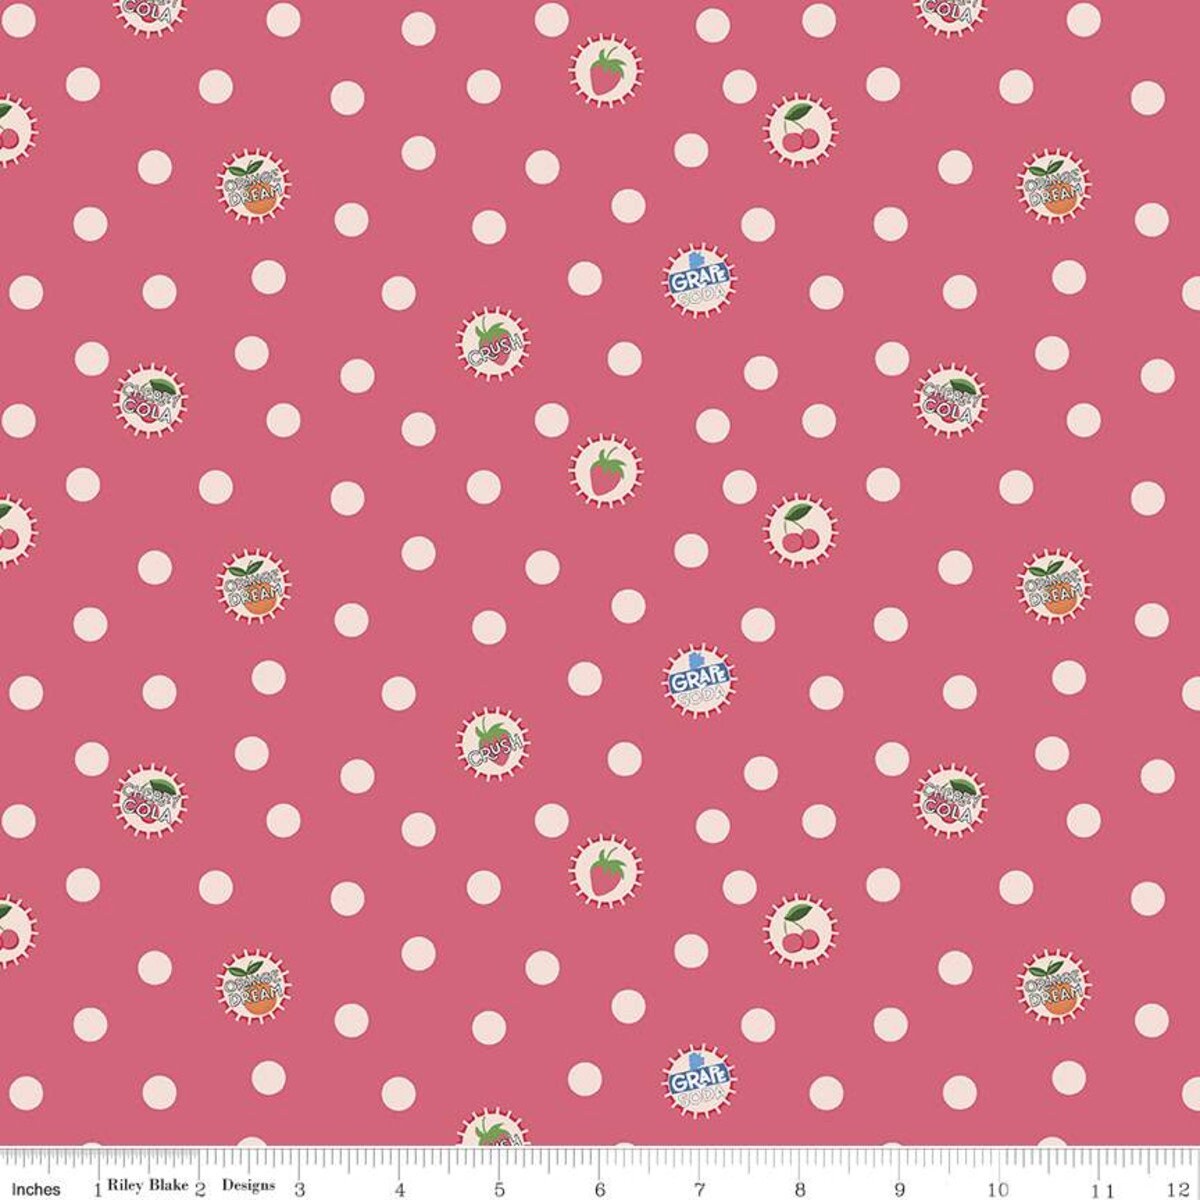 Floral Fabric Squares, Strawberries, Cherries, Gingham, Pink, Blue, Green, 5 inch, 42 Squares Total, Riley Blake